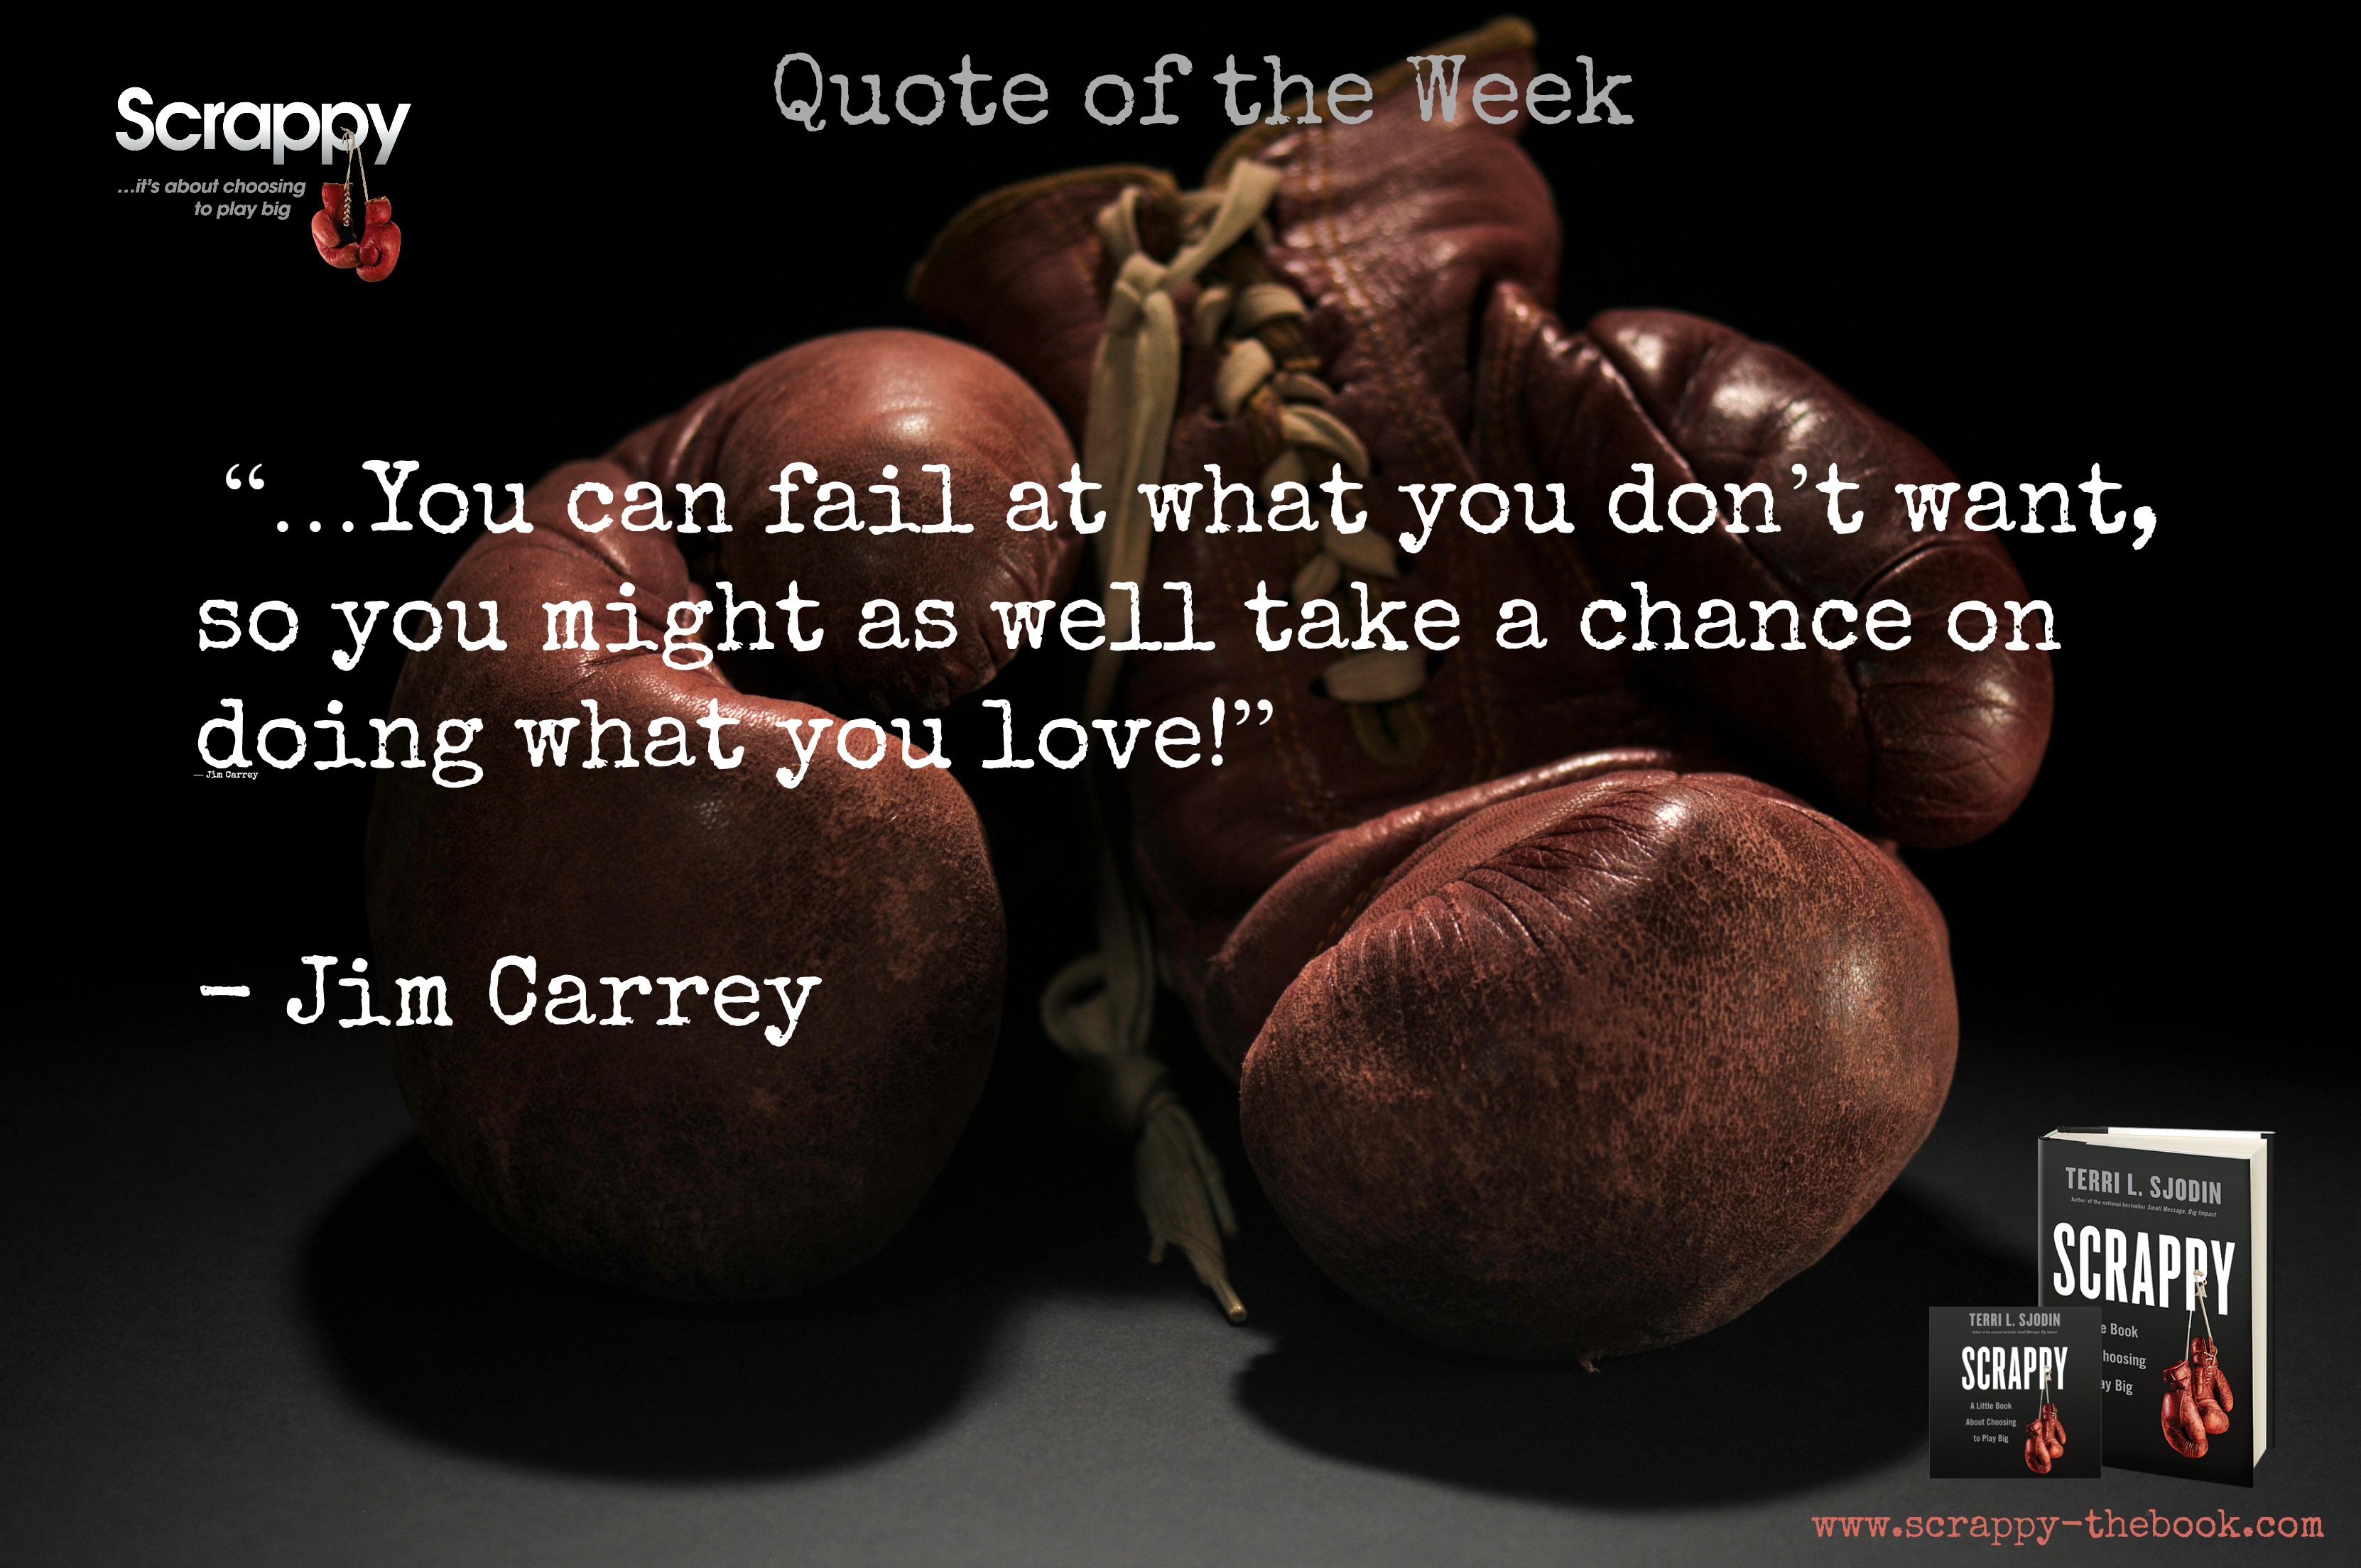 Scrappy Quote of the Week - Jim Carrey